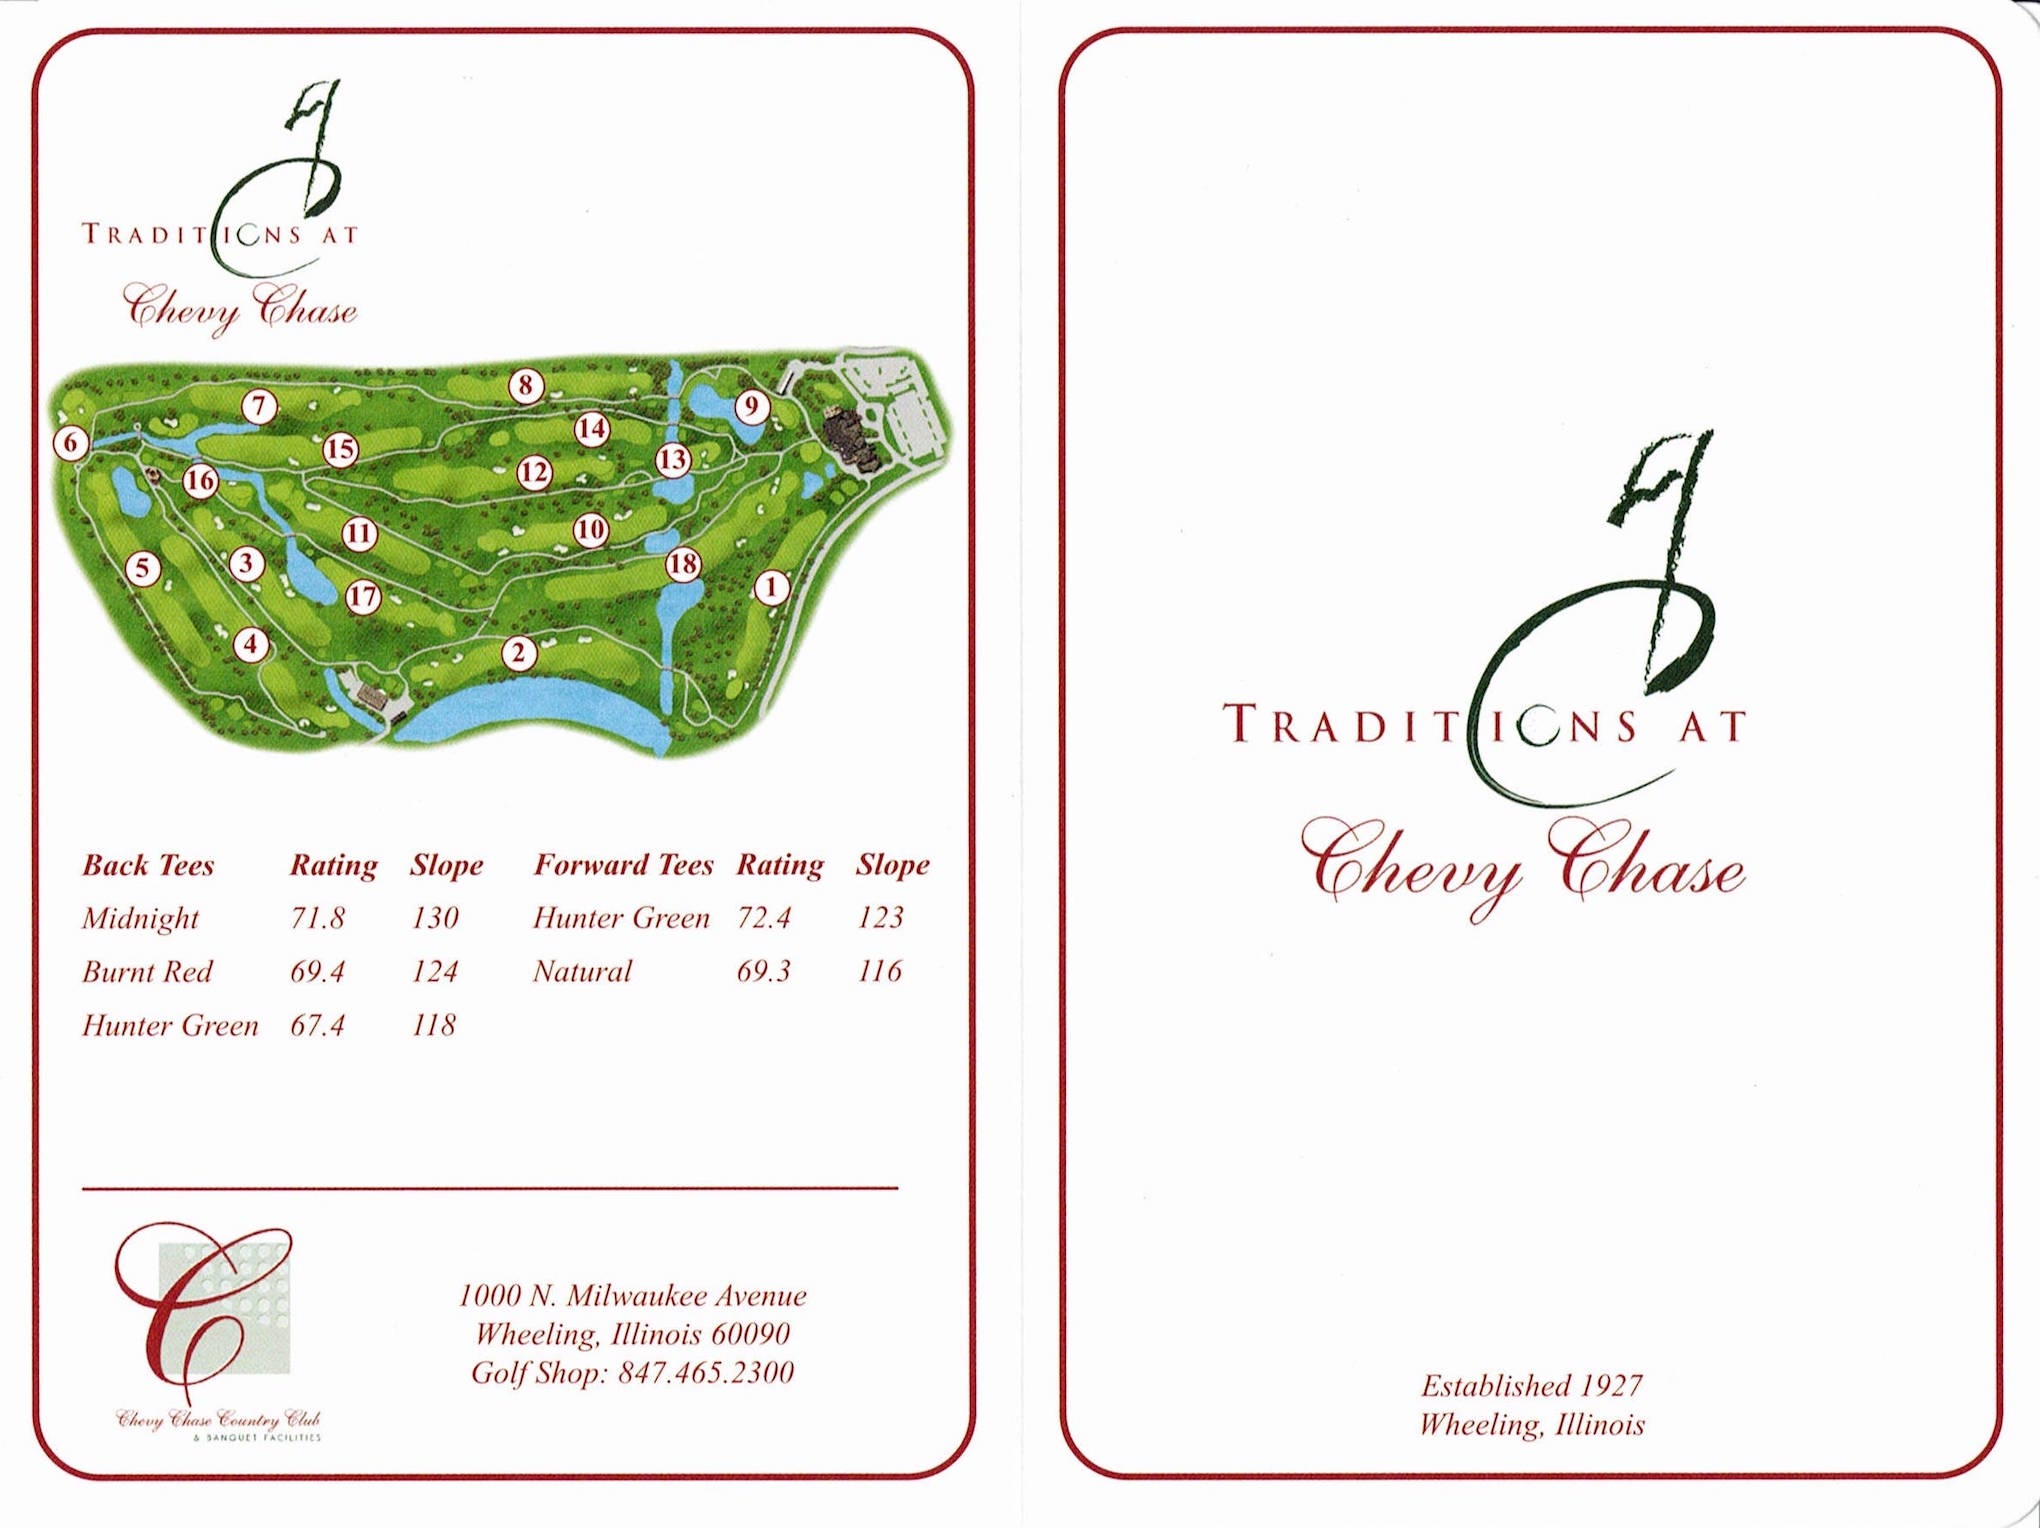 Scan of the scorecard from Chevy Chase Country Club in Wheeling, Illinois. 